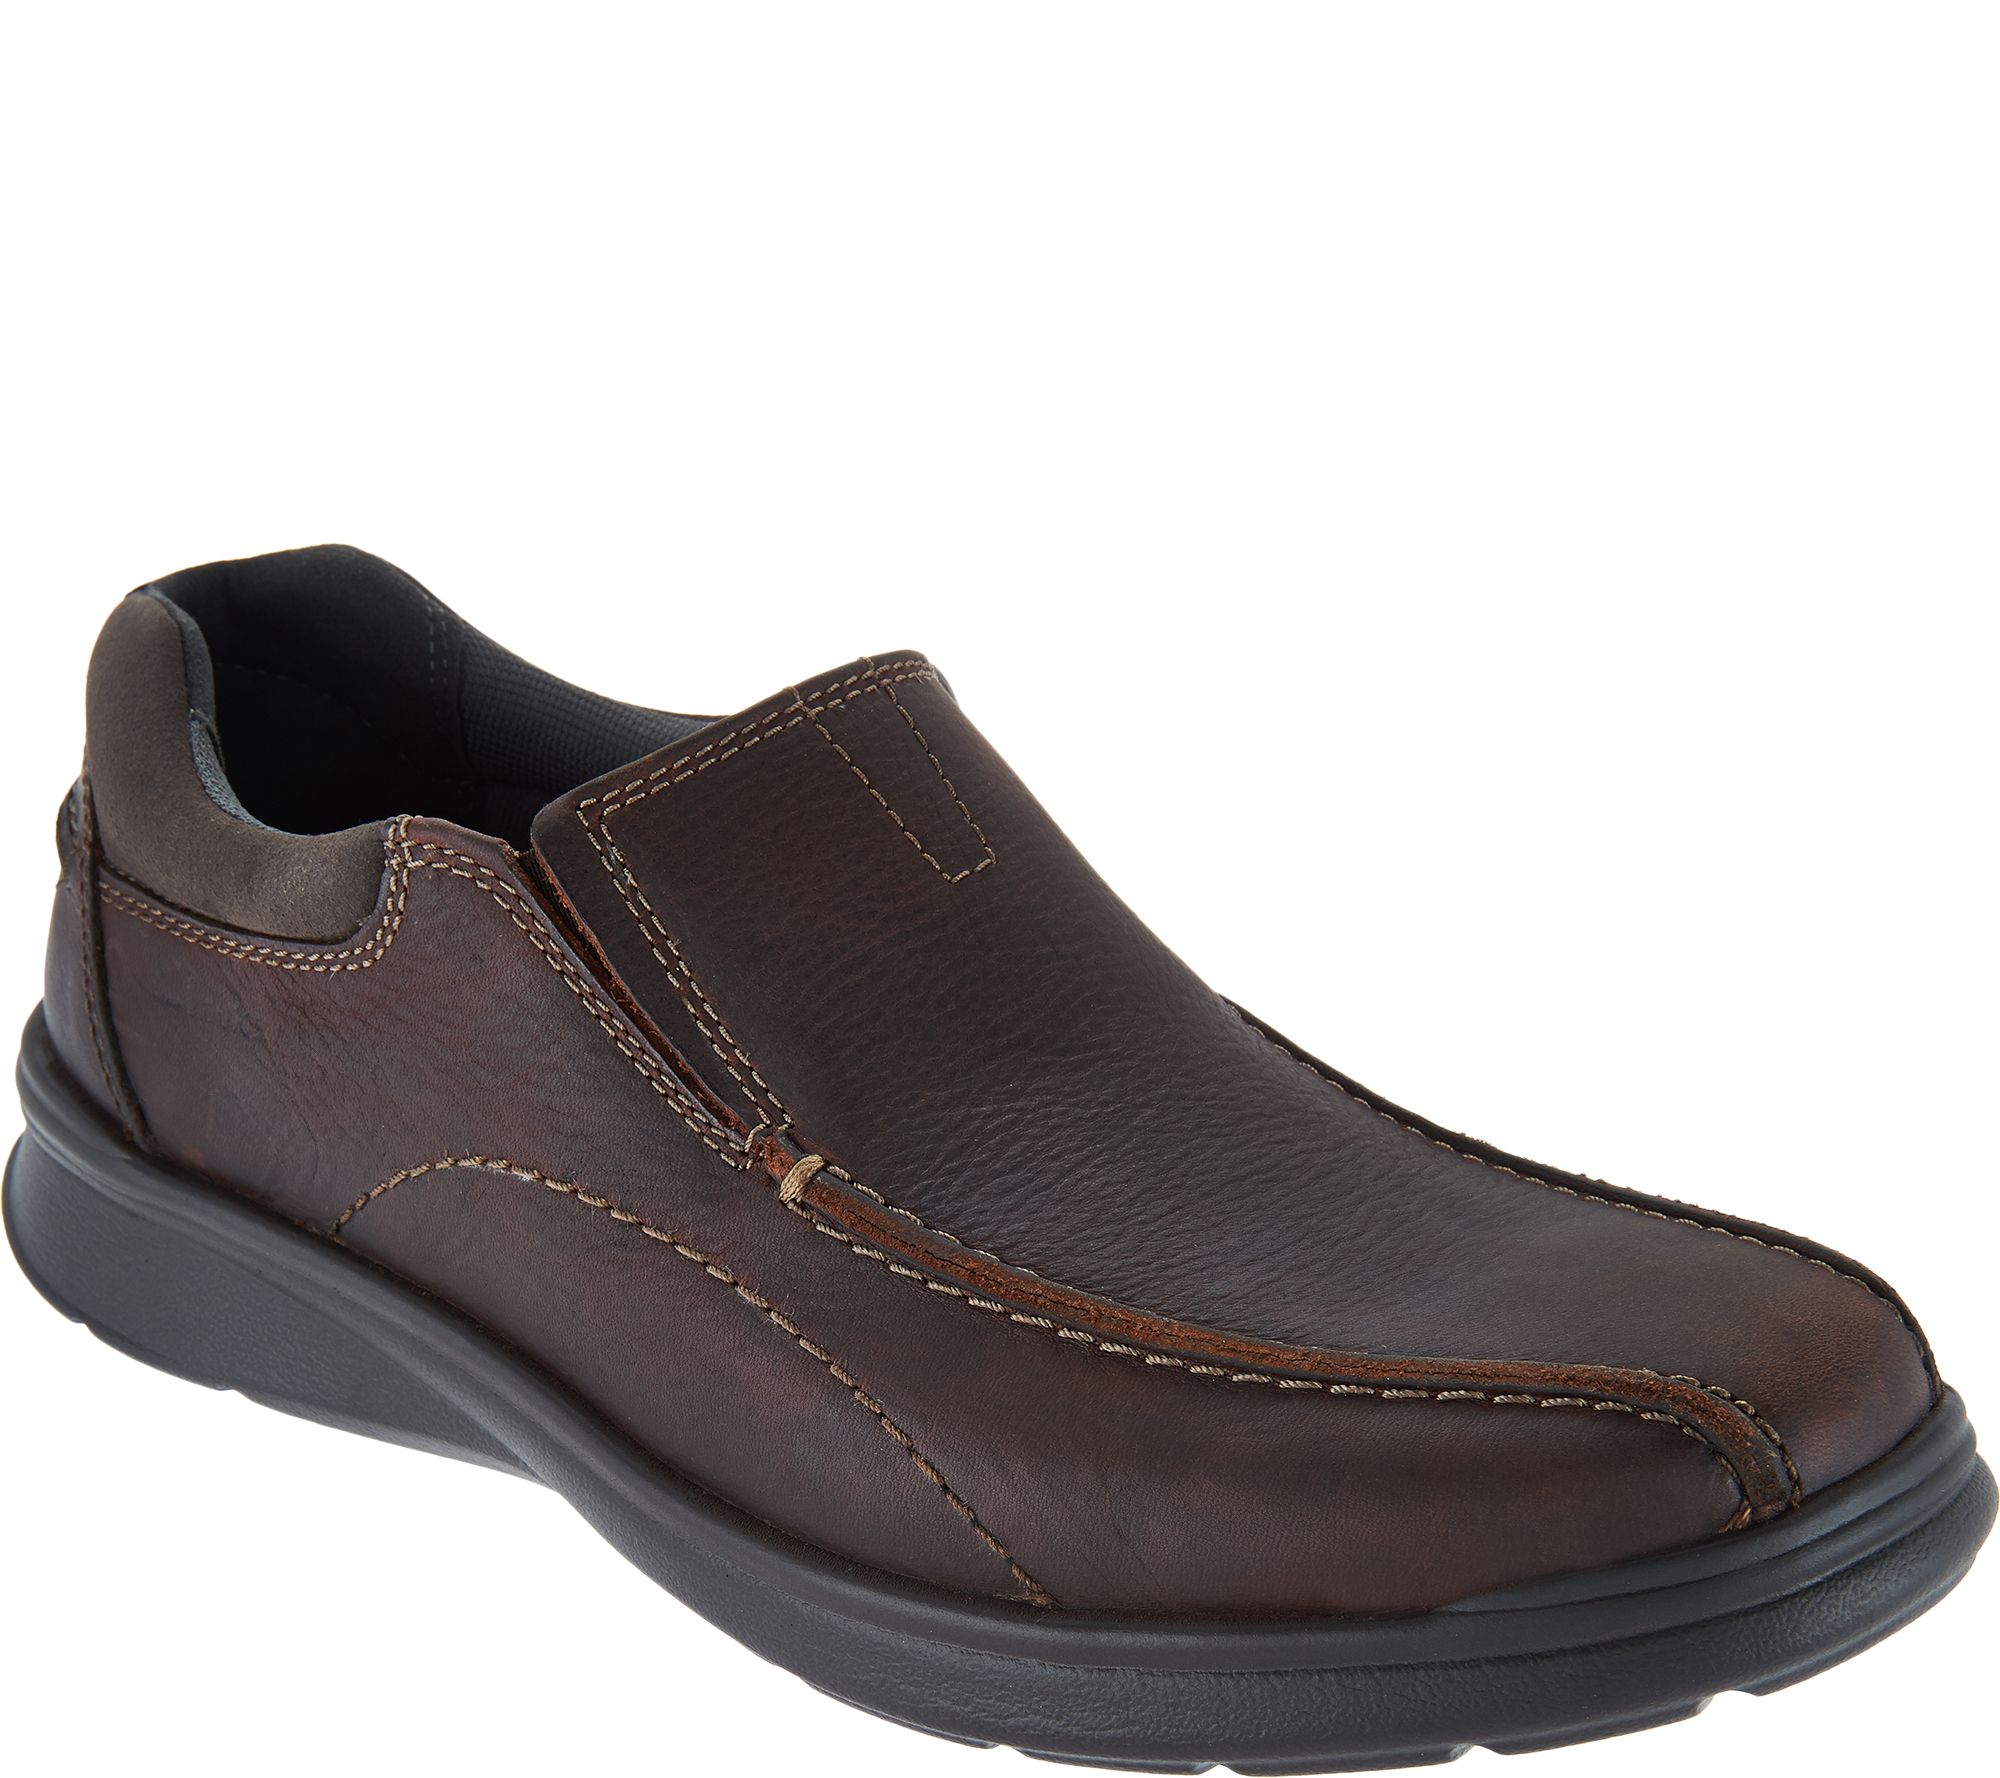 Clarks Men's Leather Slip-on Shoes - Cotrell Step - Page 1 — QVC.com